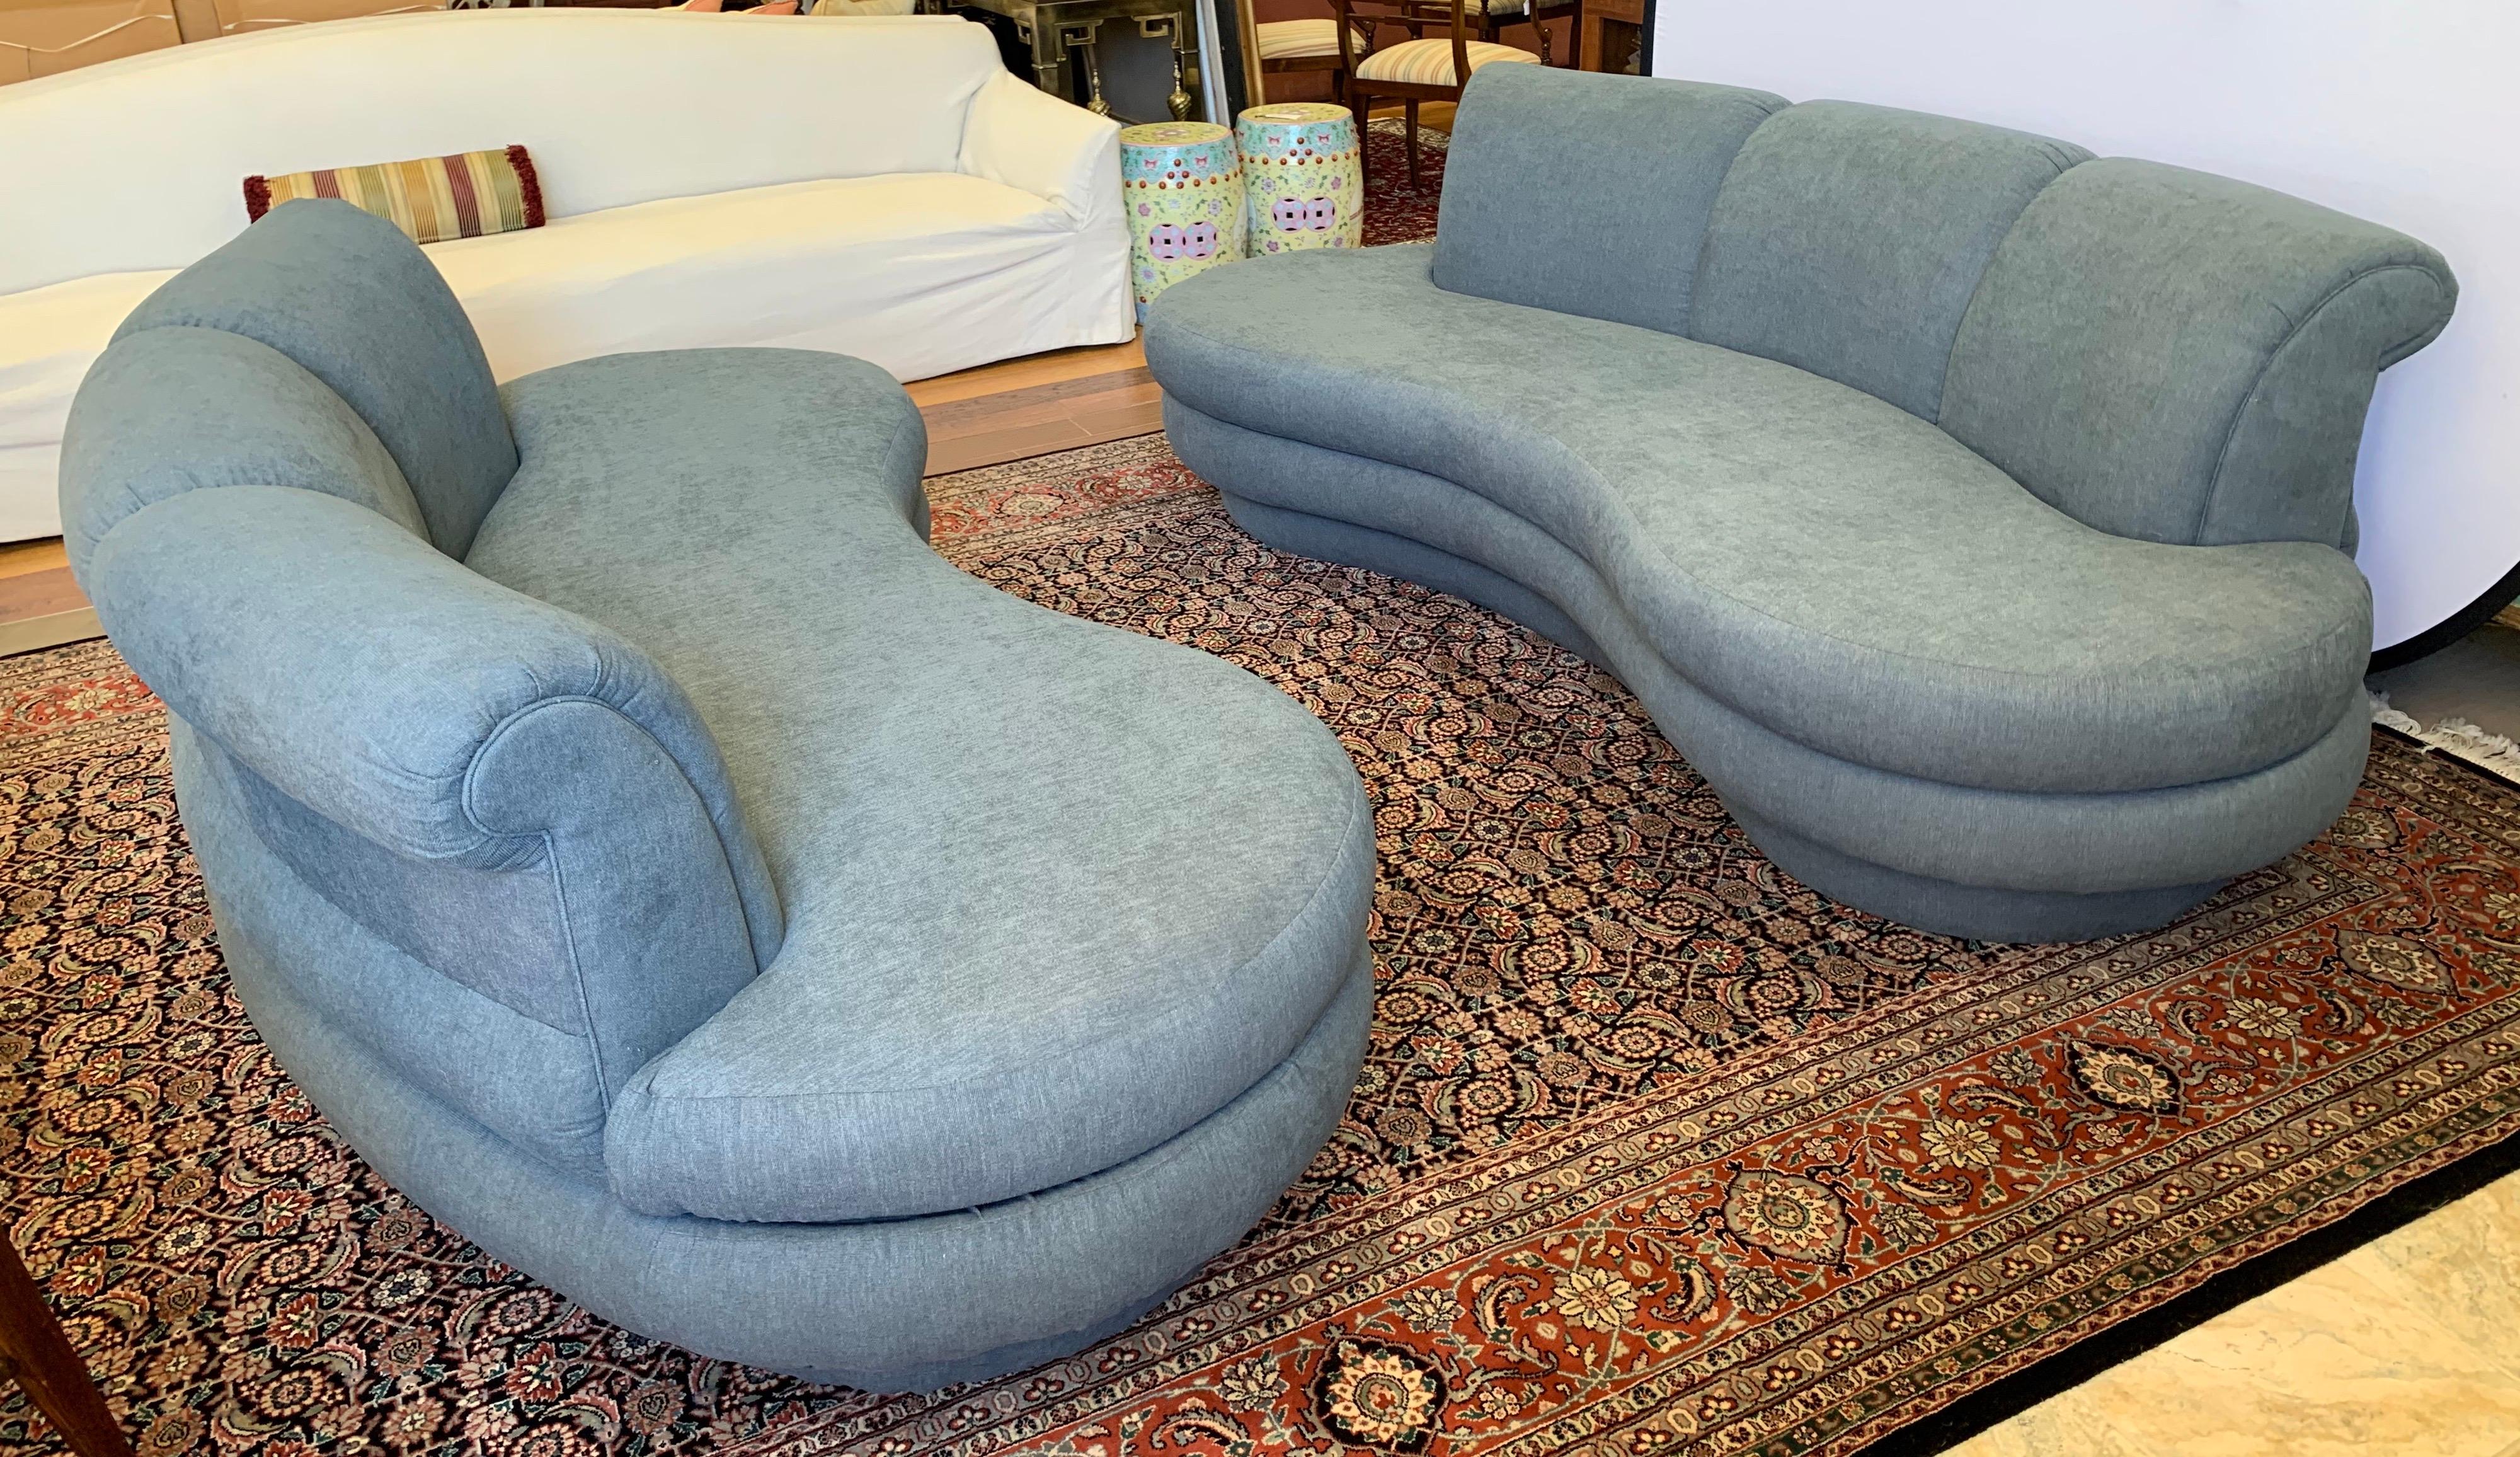 Matching Pearsall Comfort Design Cloud Sofas New Upholstered in Slate Gray, Pair 4